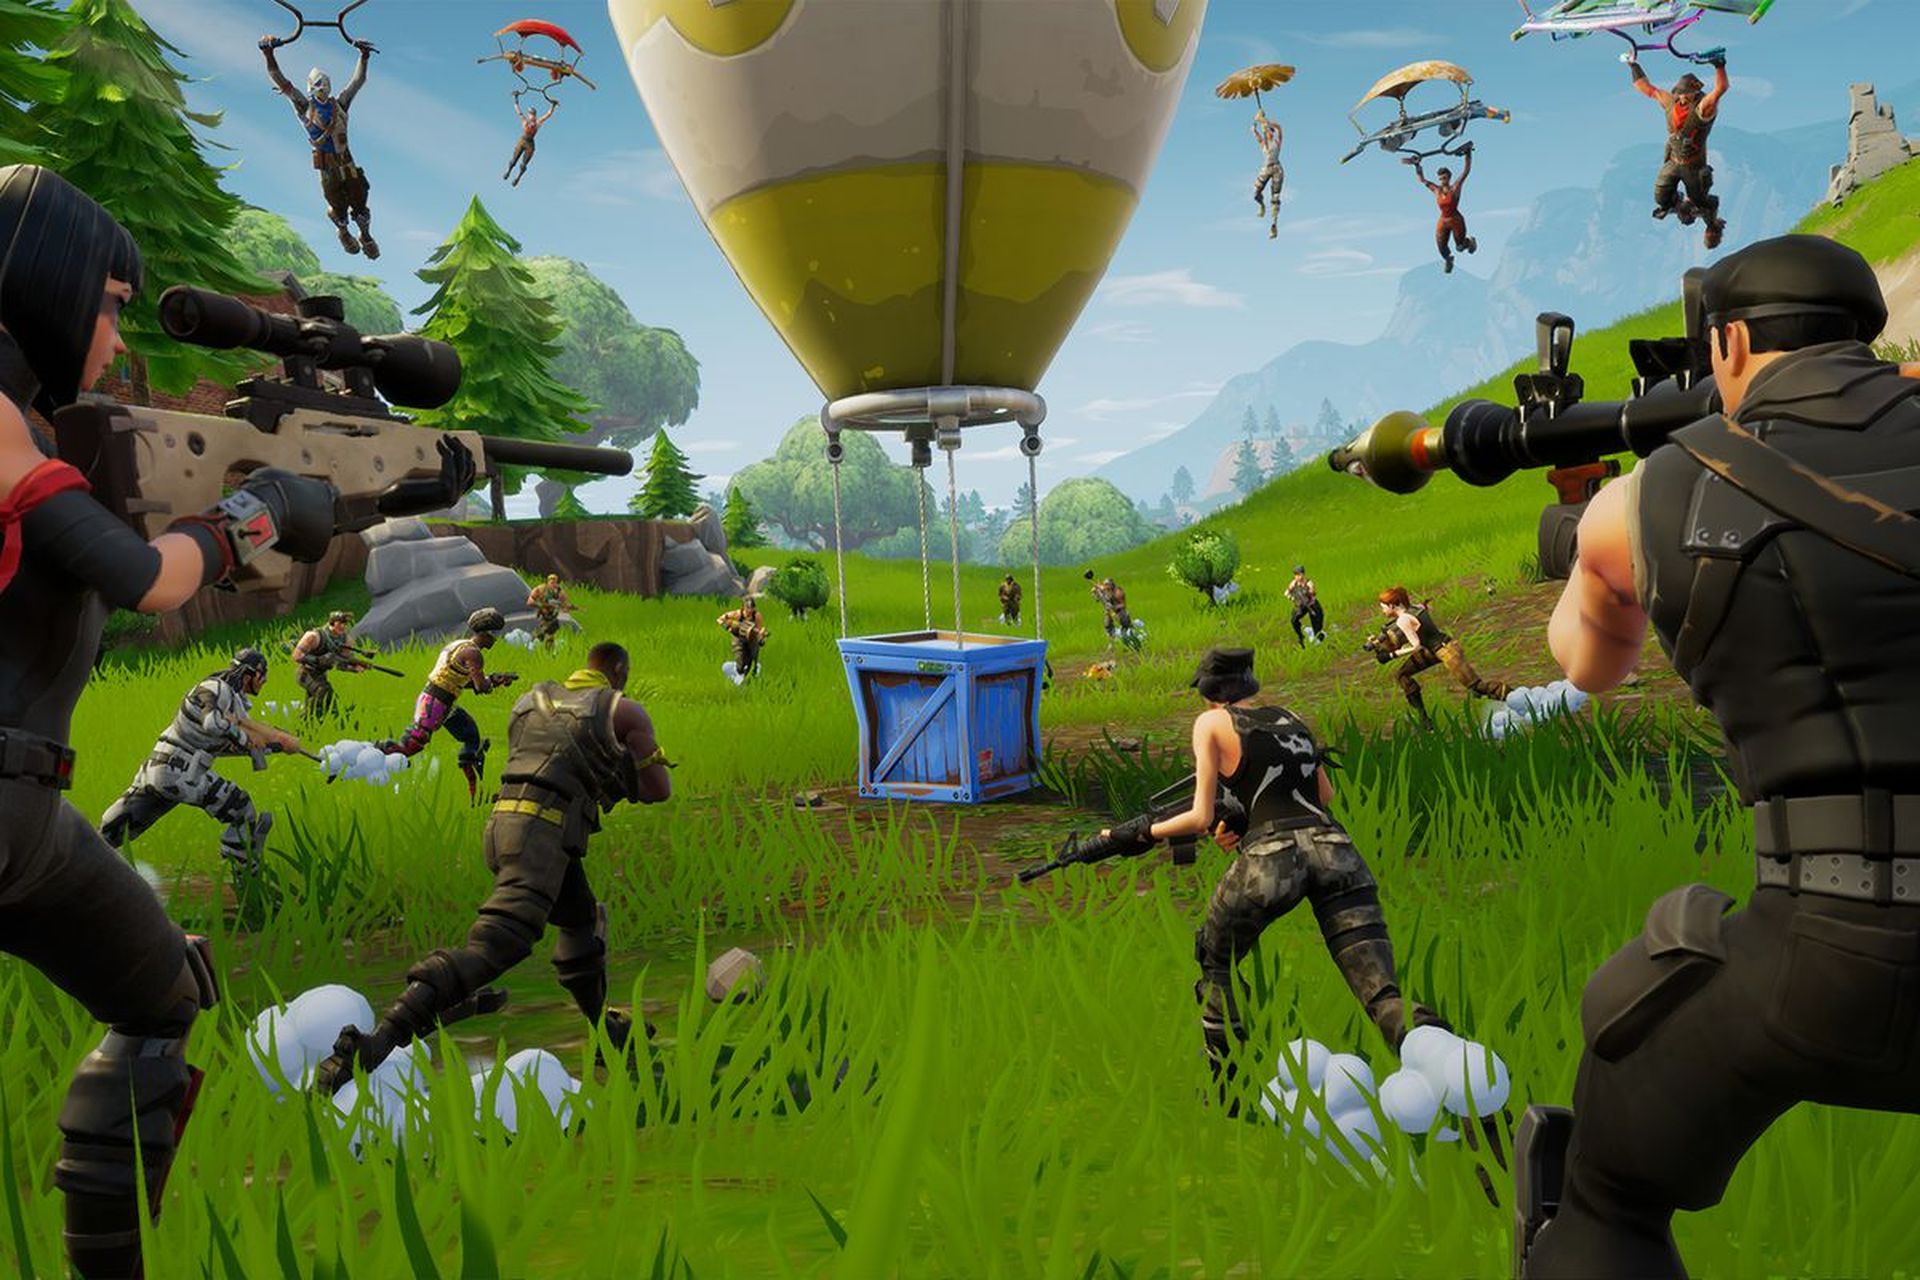 In this article, we are going to go over the Fortnite You do not have permission error fix, so you can enjoy the popular battle royale without any issues.